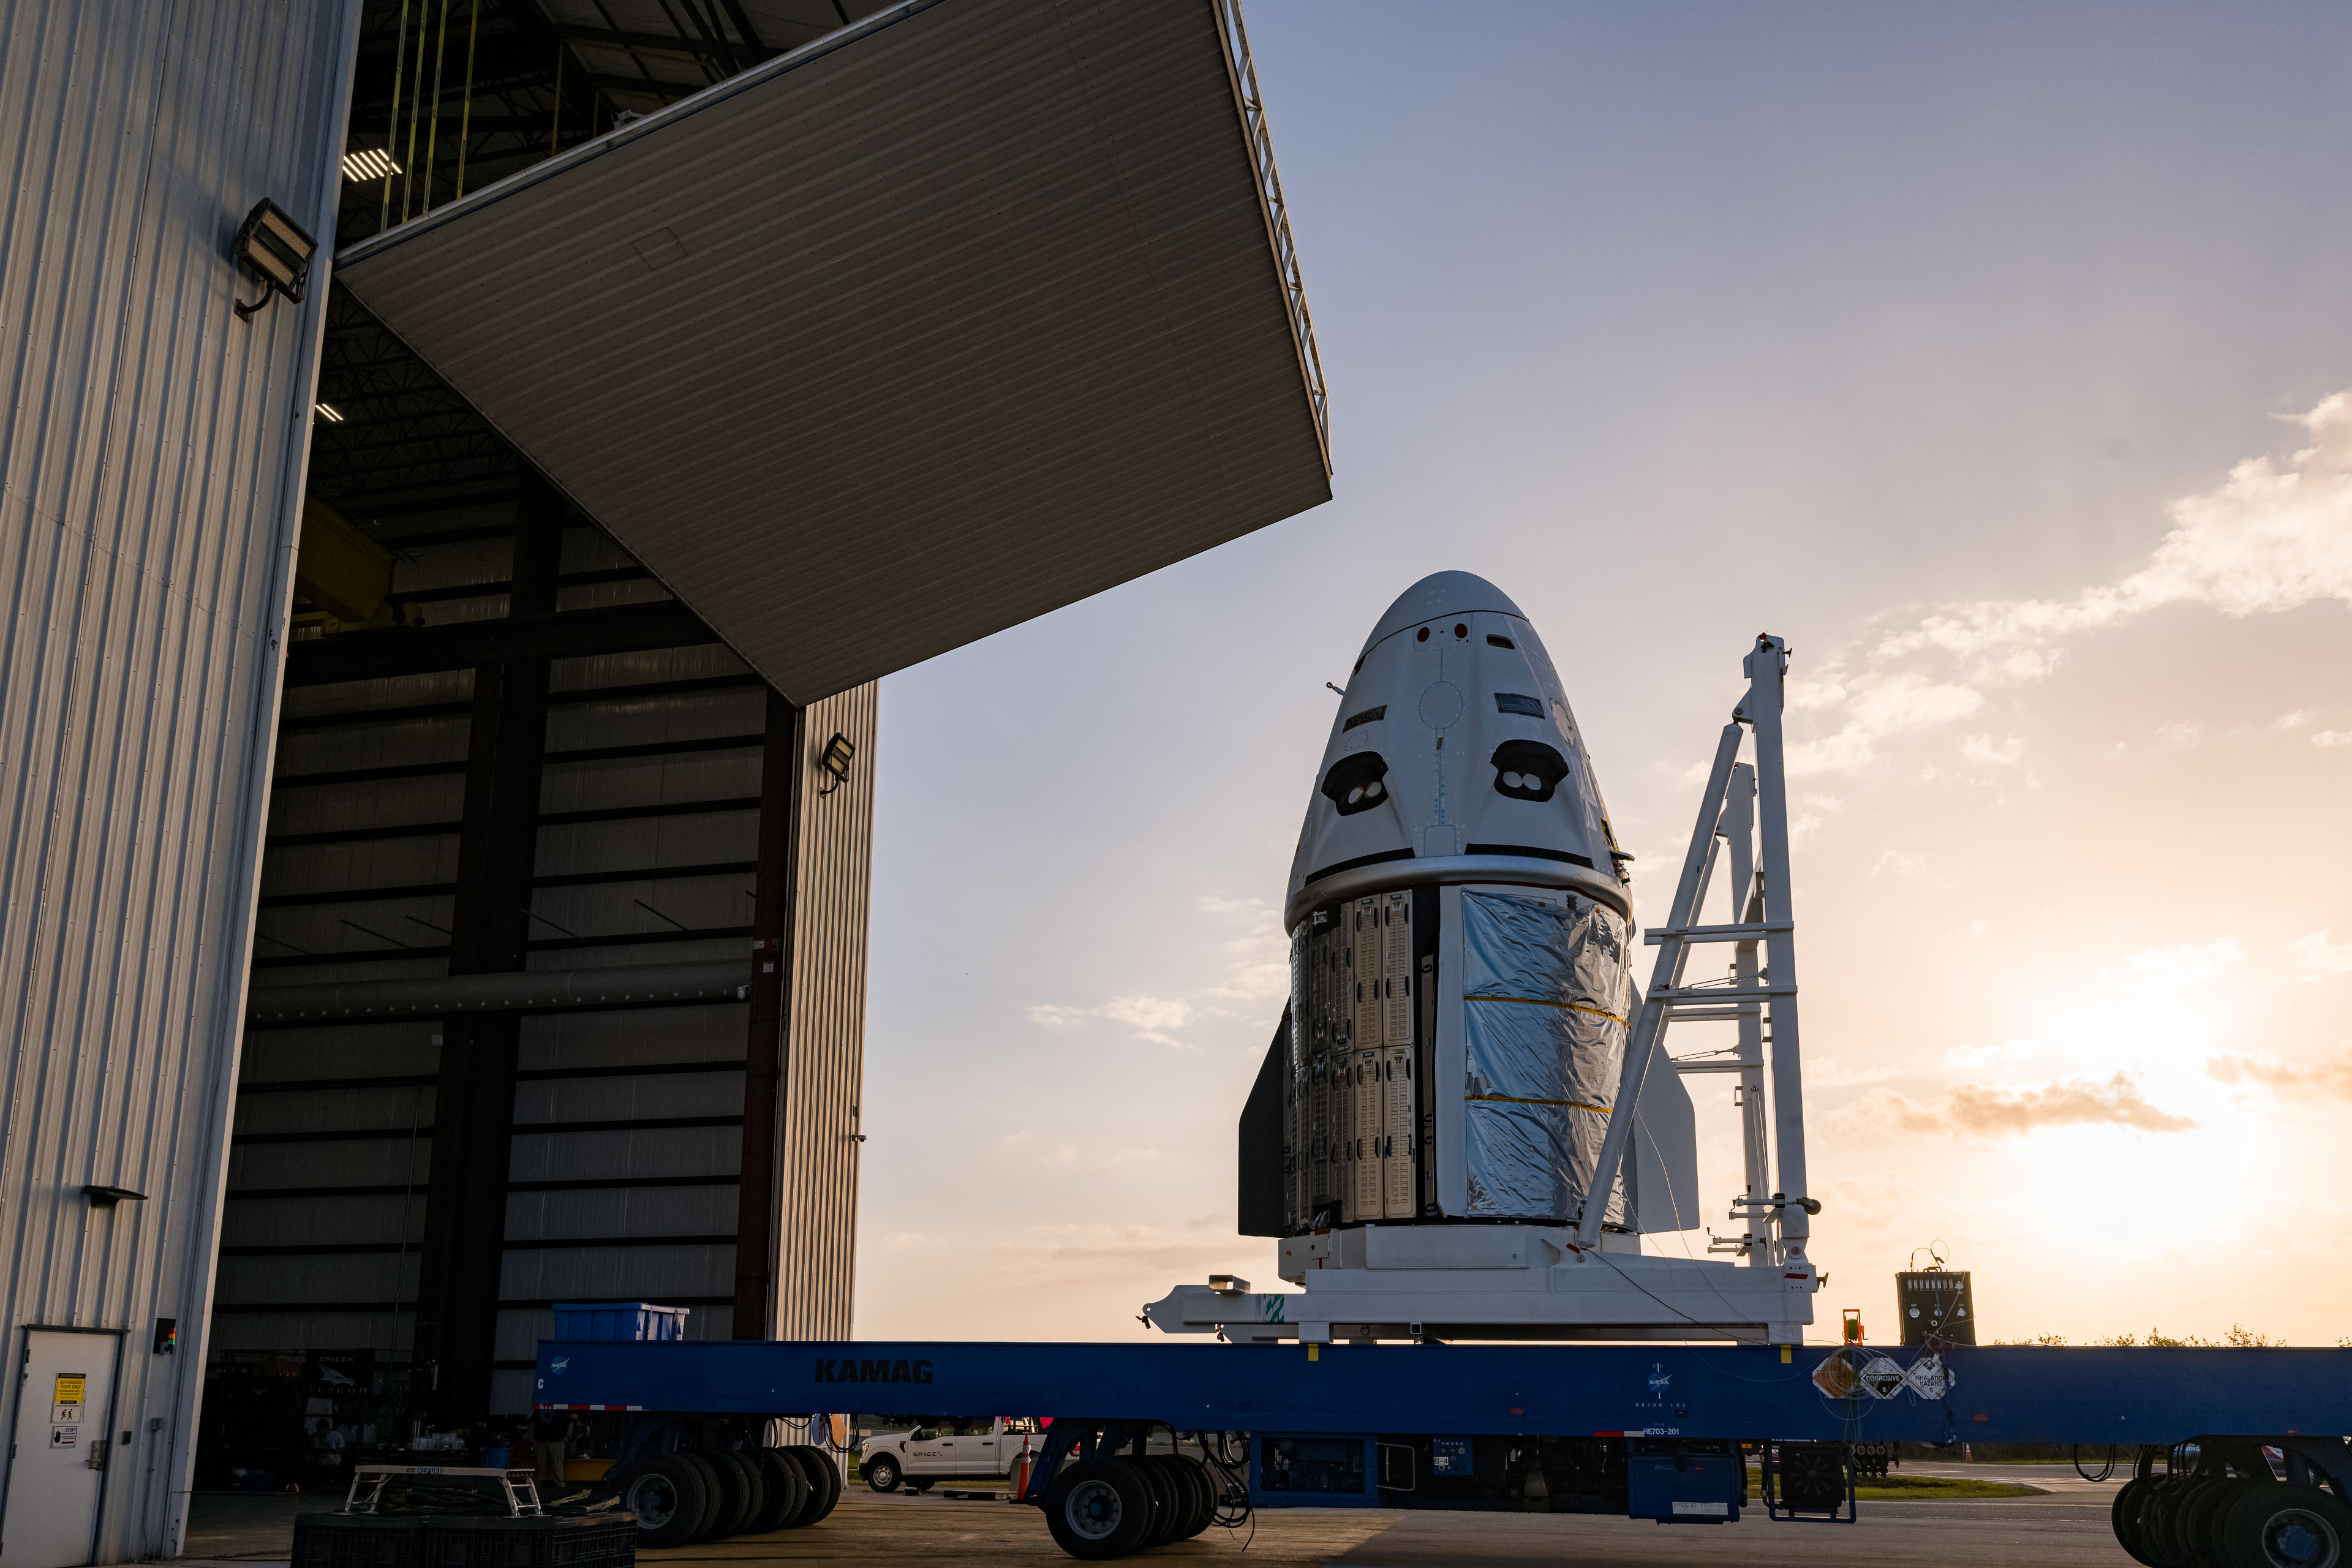 The SpaceX Dragon capsule Endeavour, which will fly the Crew-6 mission to the International Space Station, is seen here on Pad 39A at NASA's Kennedy Space Center in Florida.  SpaceX posted this photo on Twitter on February 19, 2023.